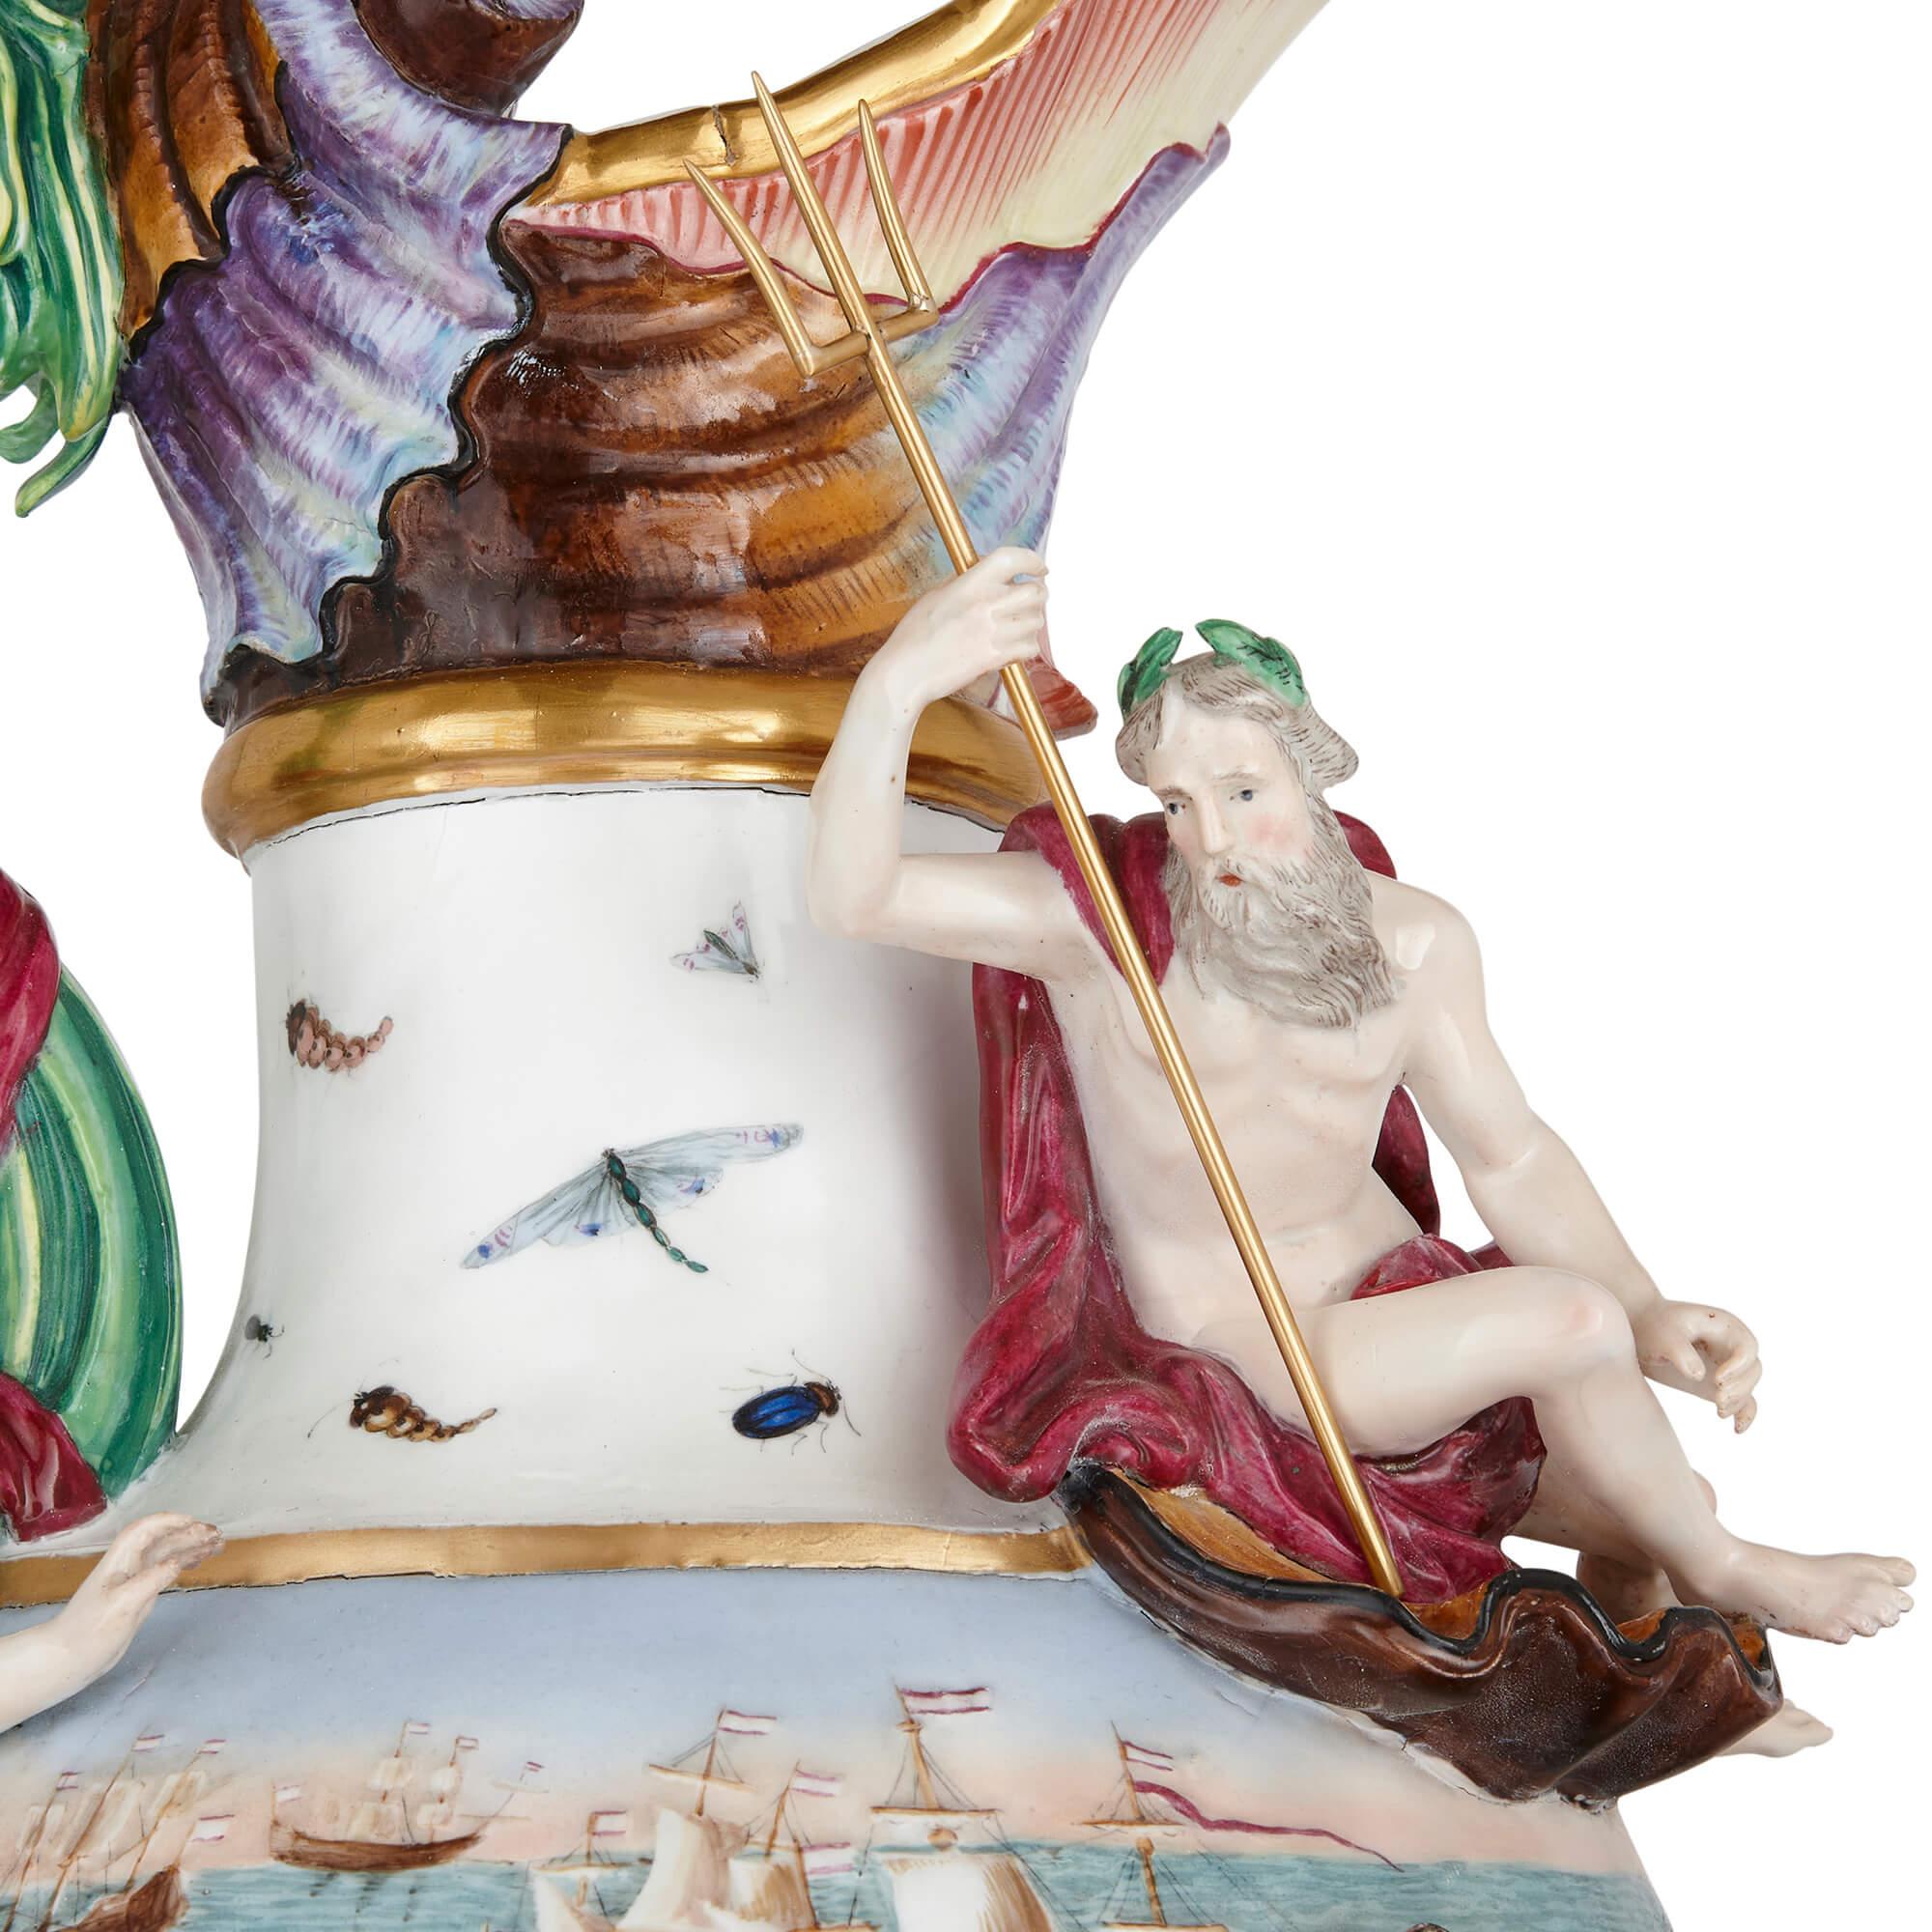 19th Century Large Porcelain ‘Water’ Ewer from the ‘Elements’ Series by Meissen